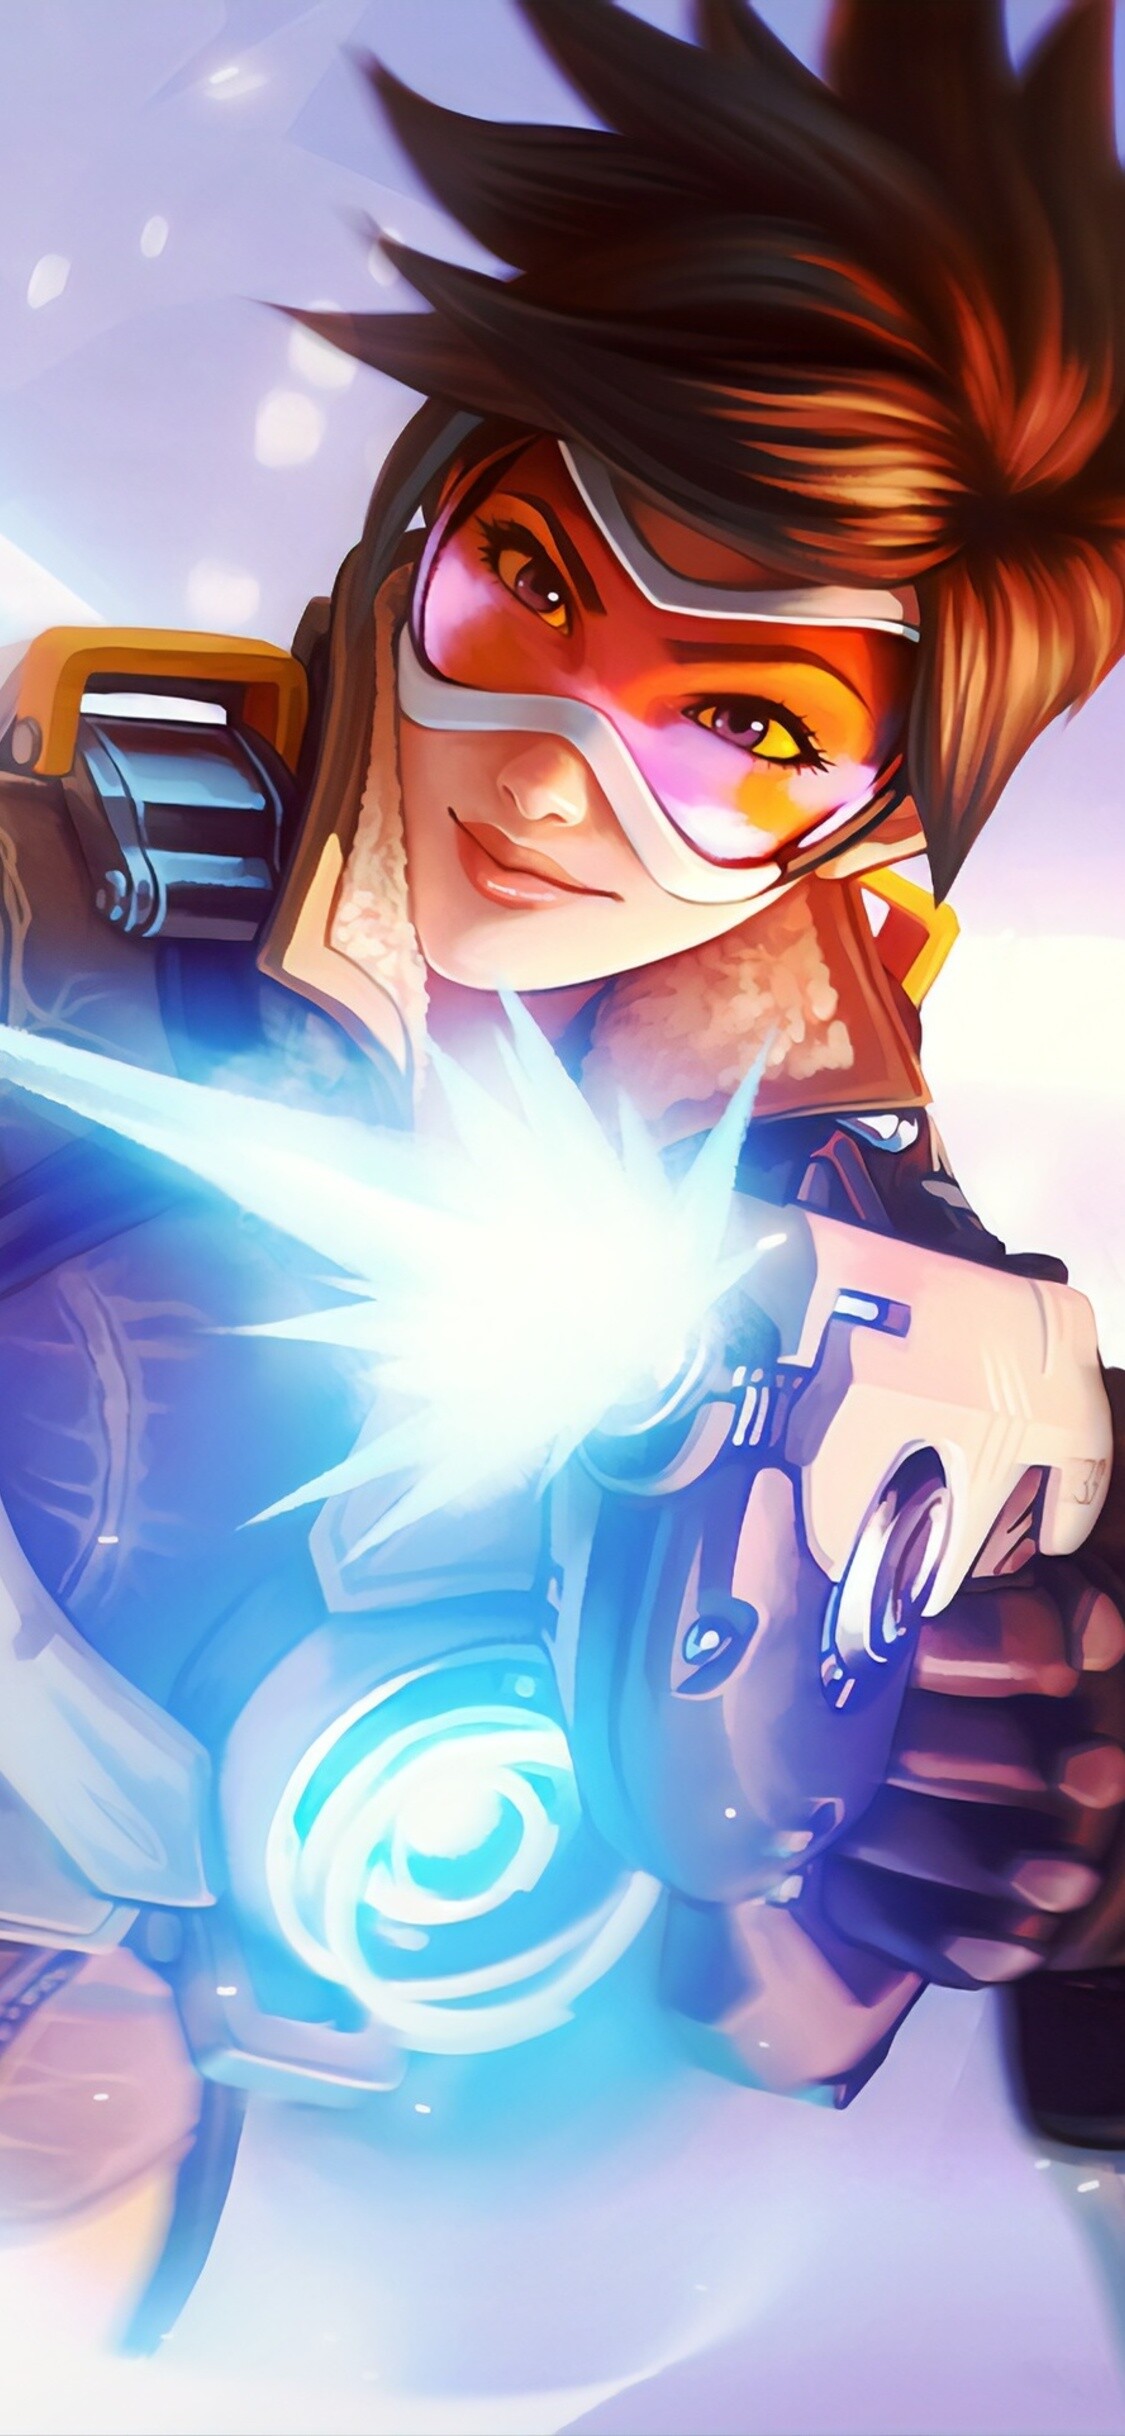 Overwatch: Tracer, The first Hero developed for the game. 1130x2440 HD Wallpaper.